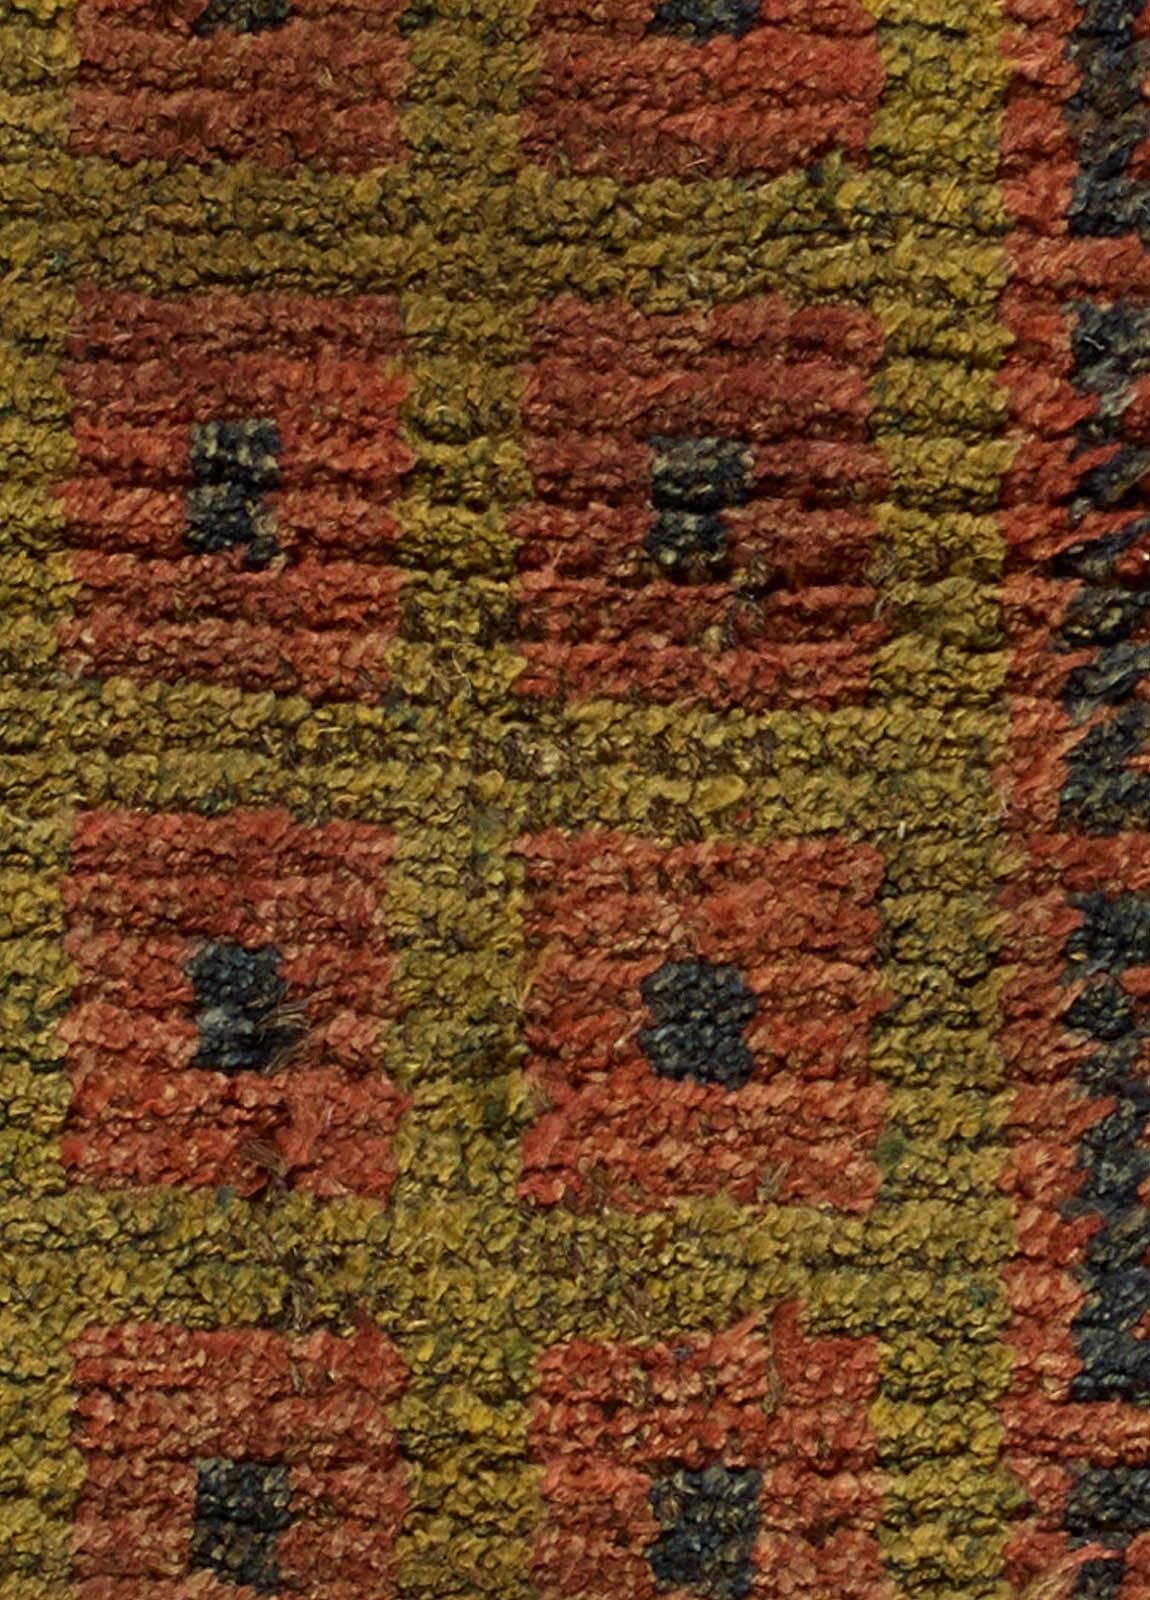 This antique Tibetan monastic runner features an all-over design of geometric motifs in earthy shades of red and green, with a pile border in black, circa 1920. The richly saturated colors make the antique runner carpet an intriguing piece of home